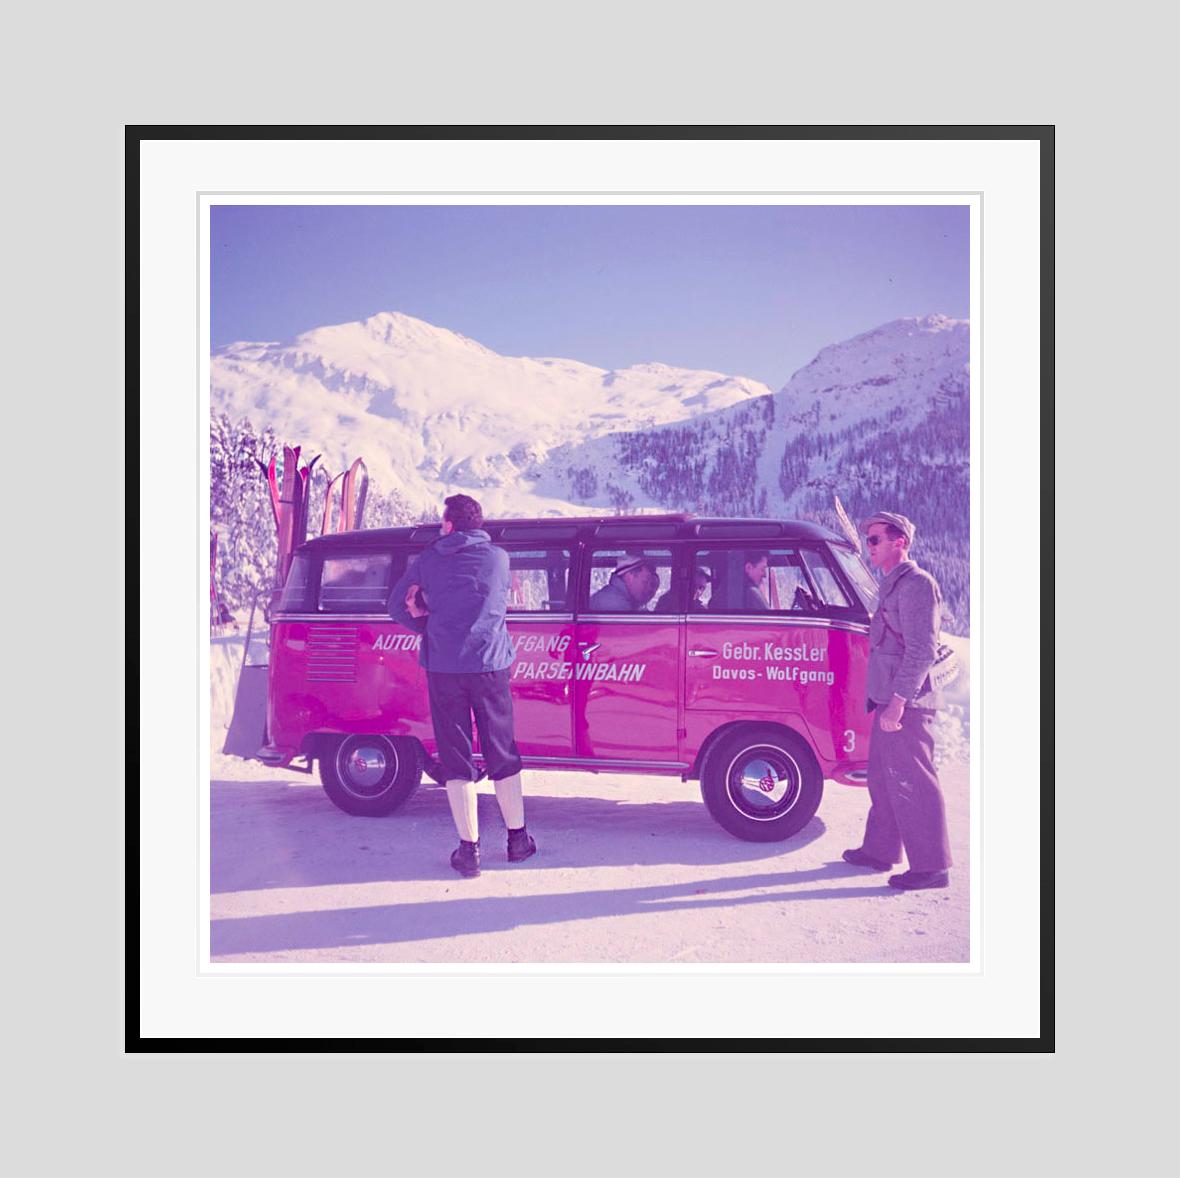 Ski Bus 

1951

Skiers take a lift in a VW camper van, Klosters, Switzerland, 1951.

by Toni Frissell

40 x 40